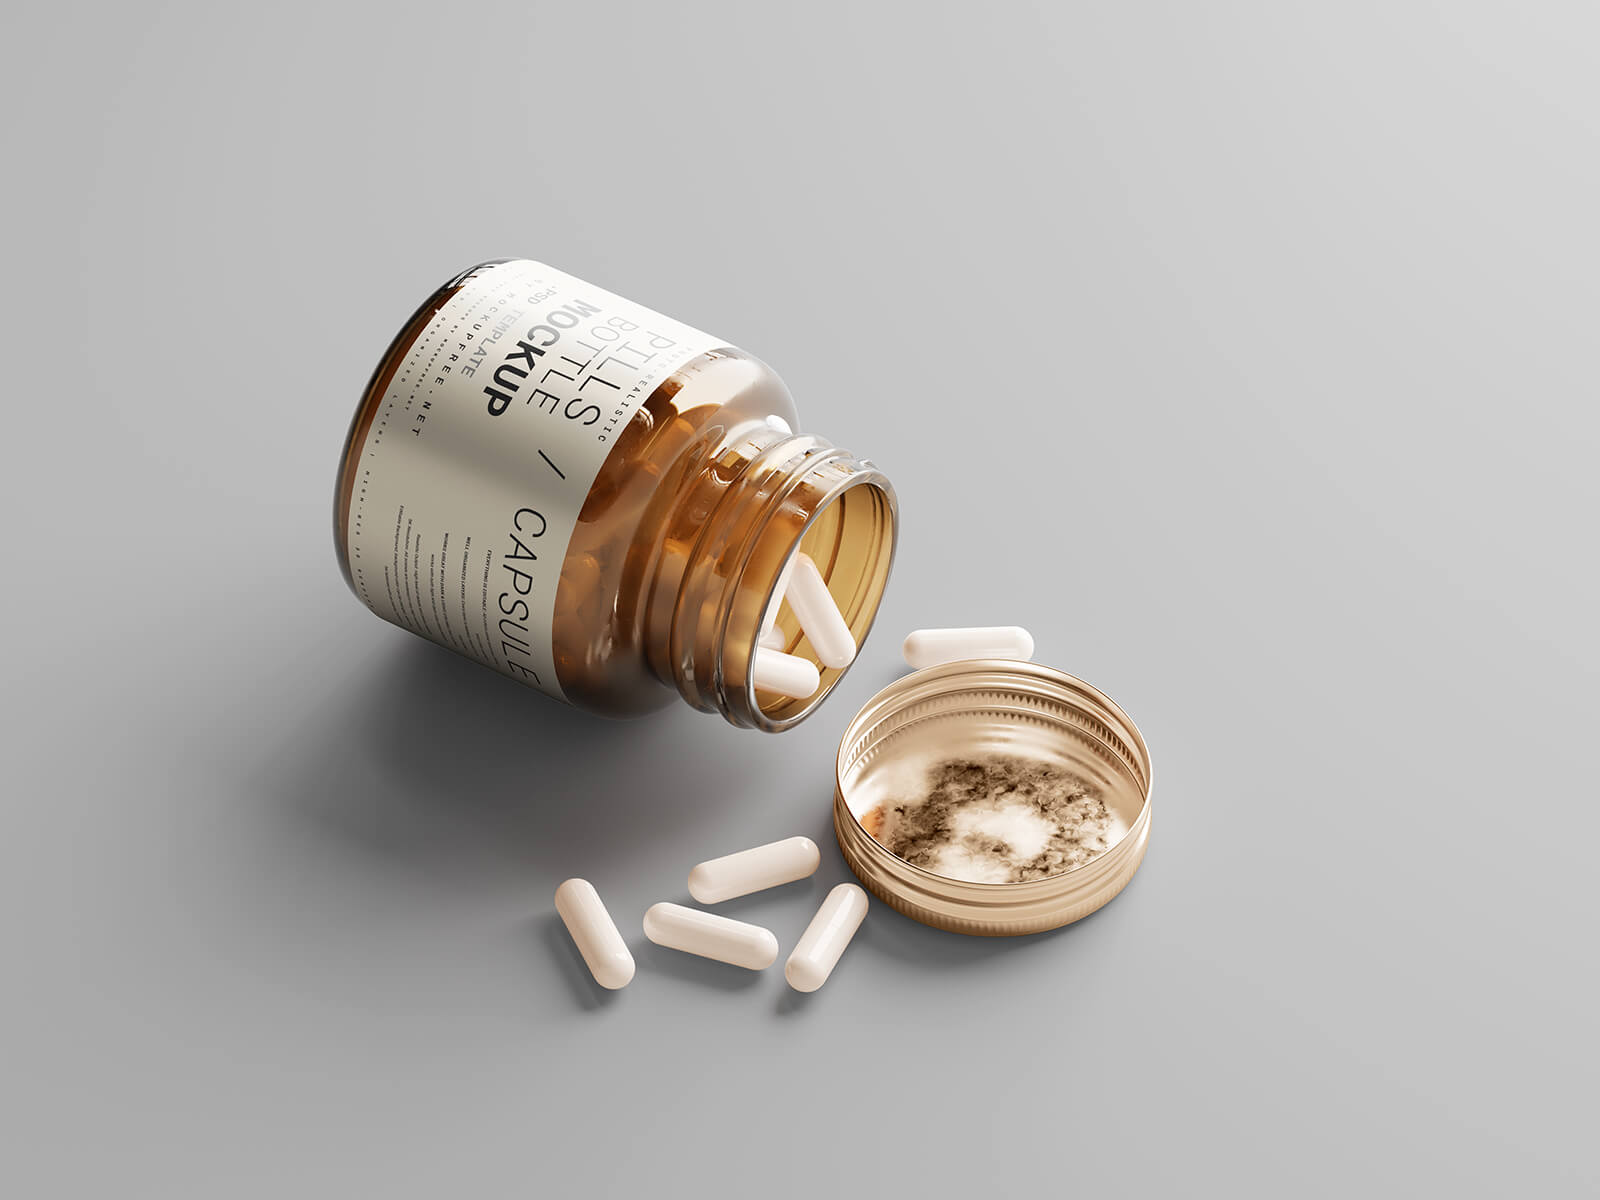 Free Small Amber Pills Capsules Bottle Mockup PSD Files